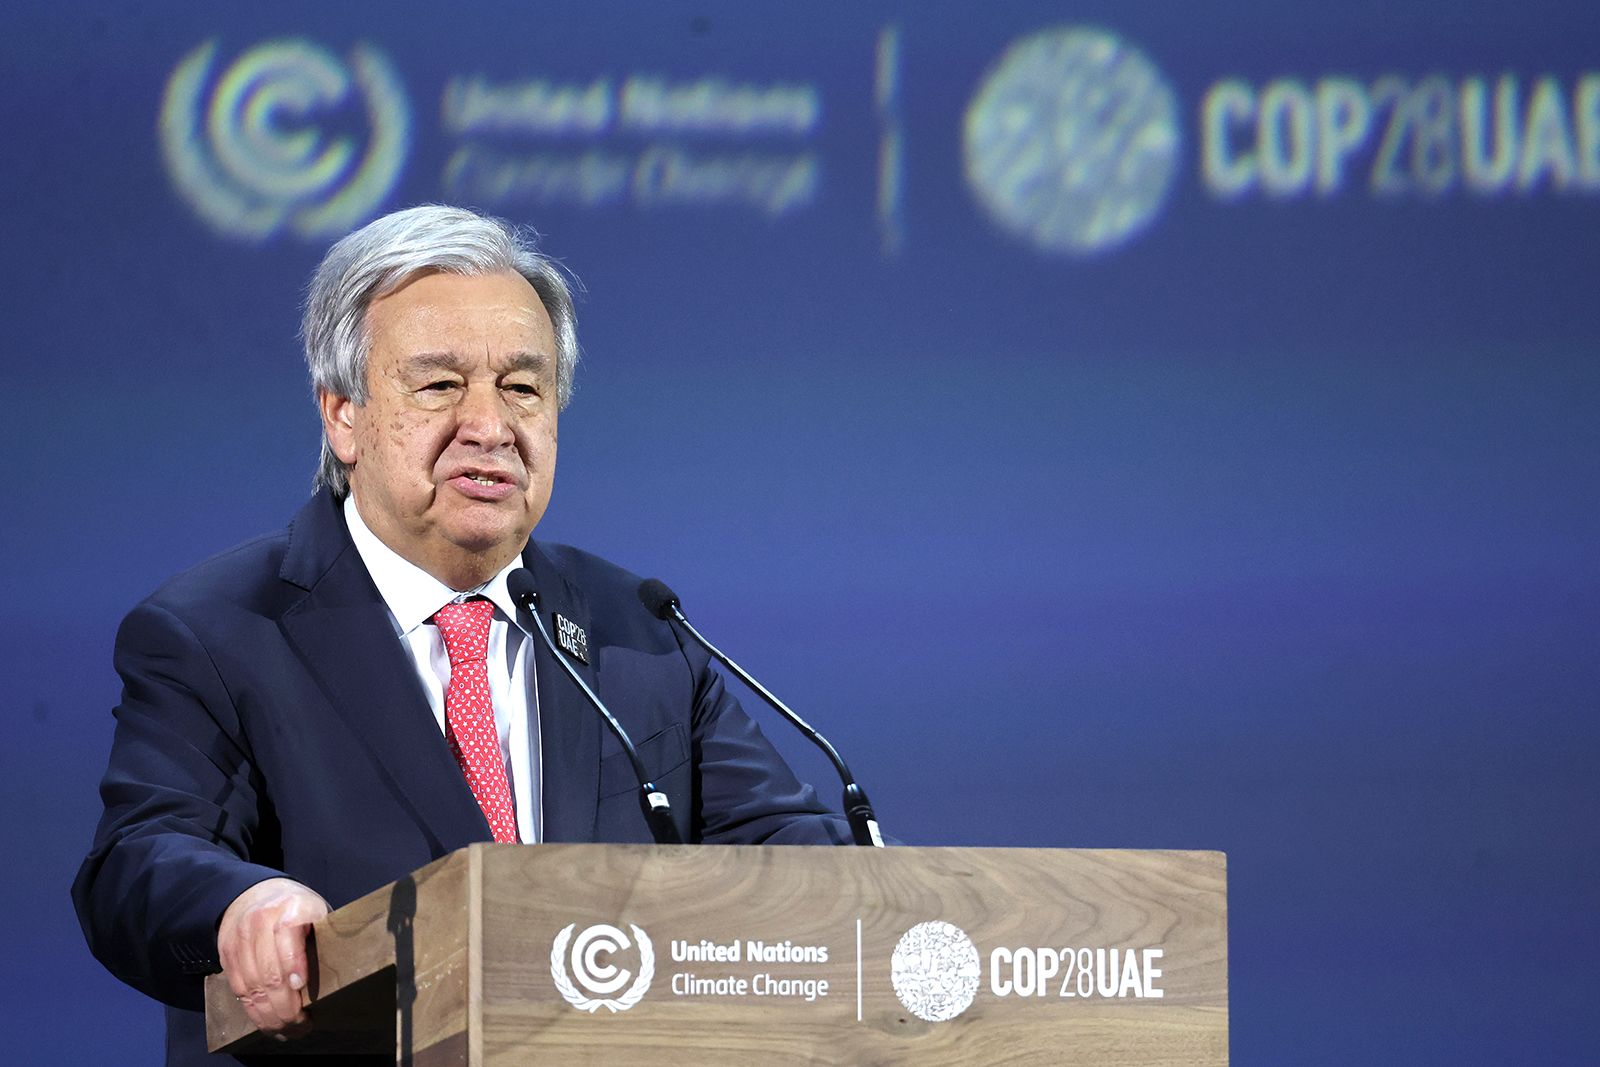 António Guterres delivers an address in Dubai on December 1.